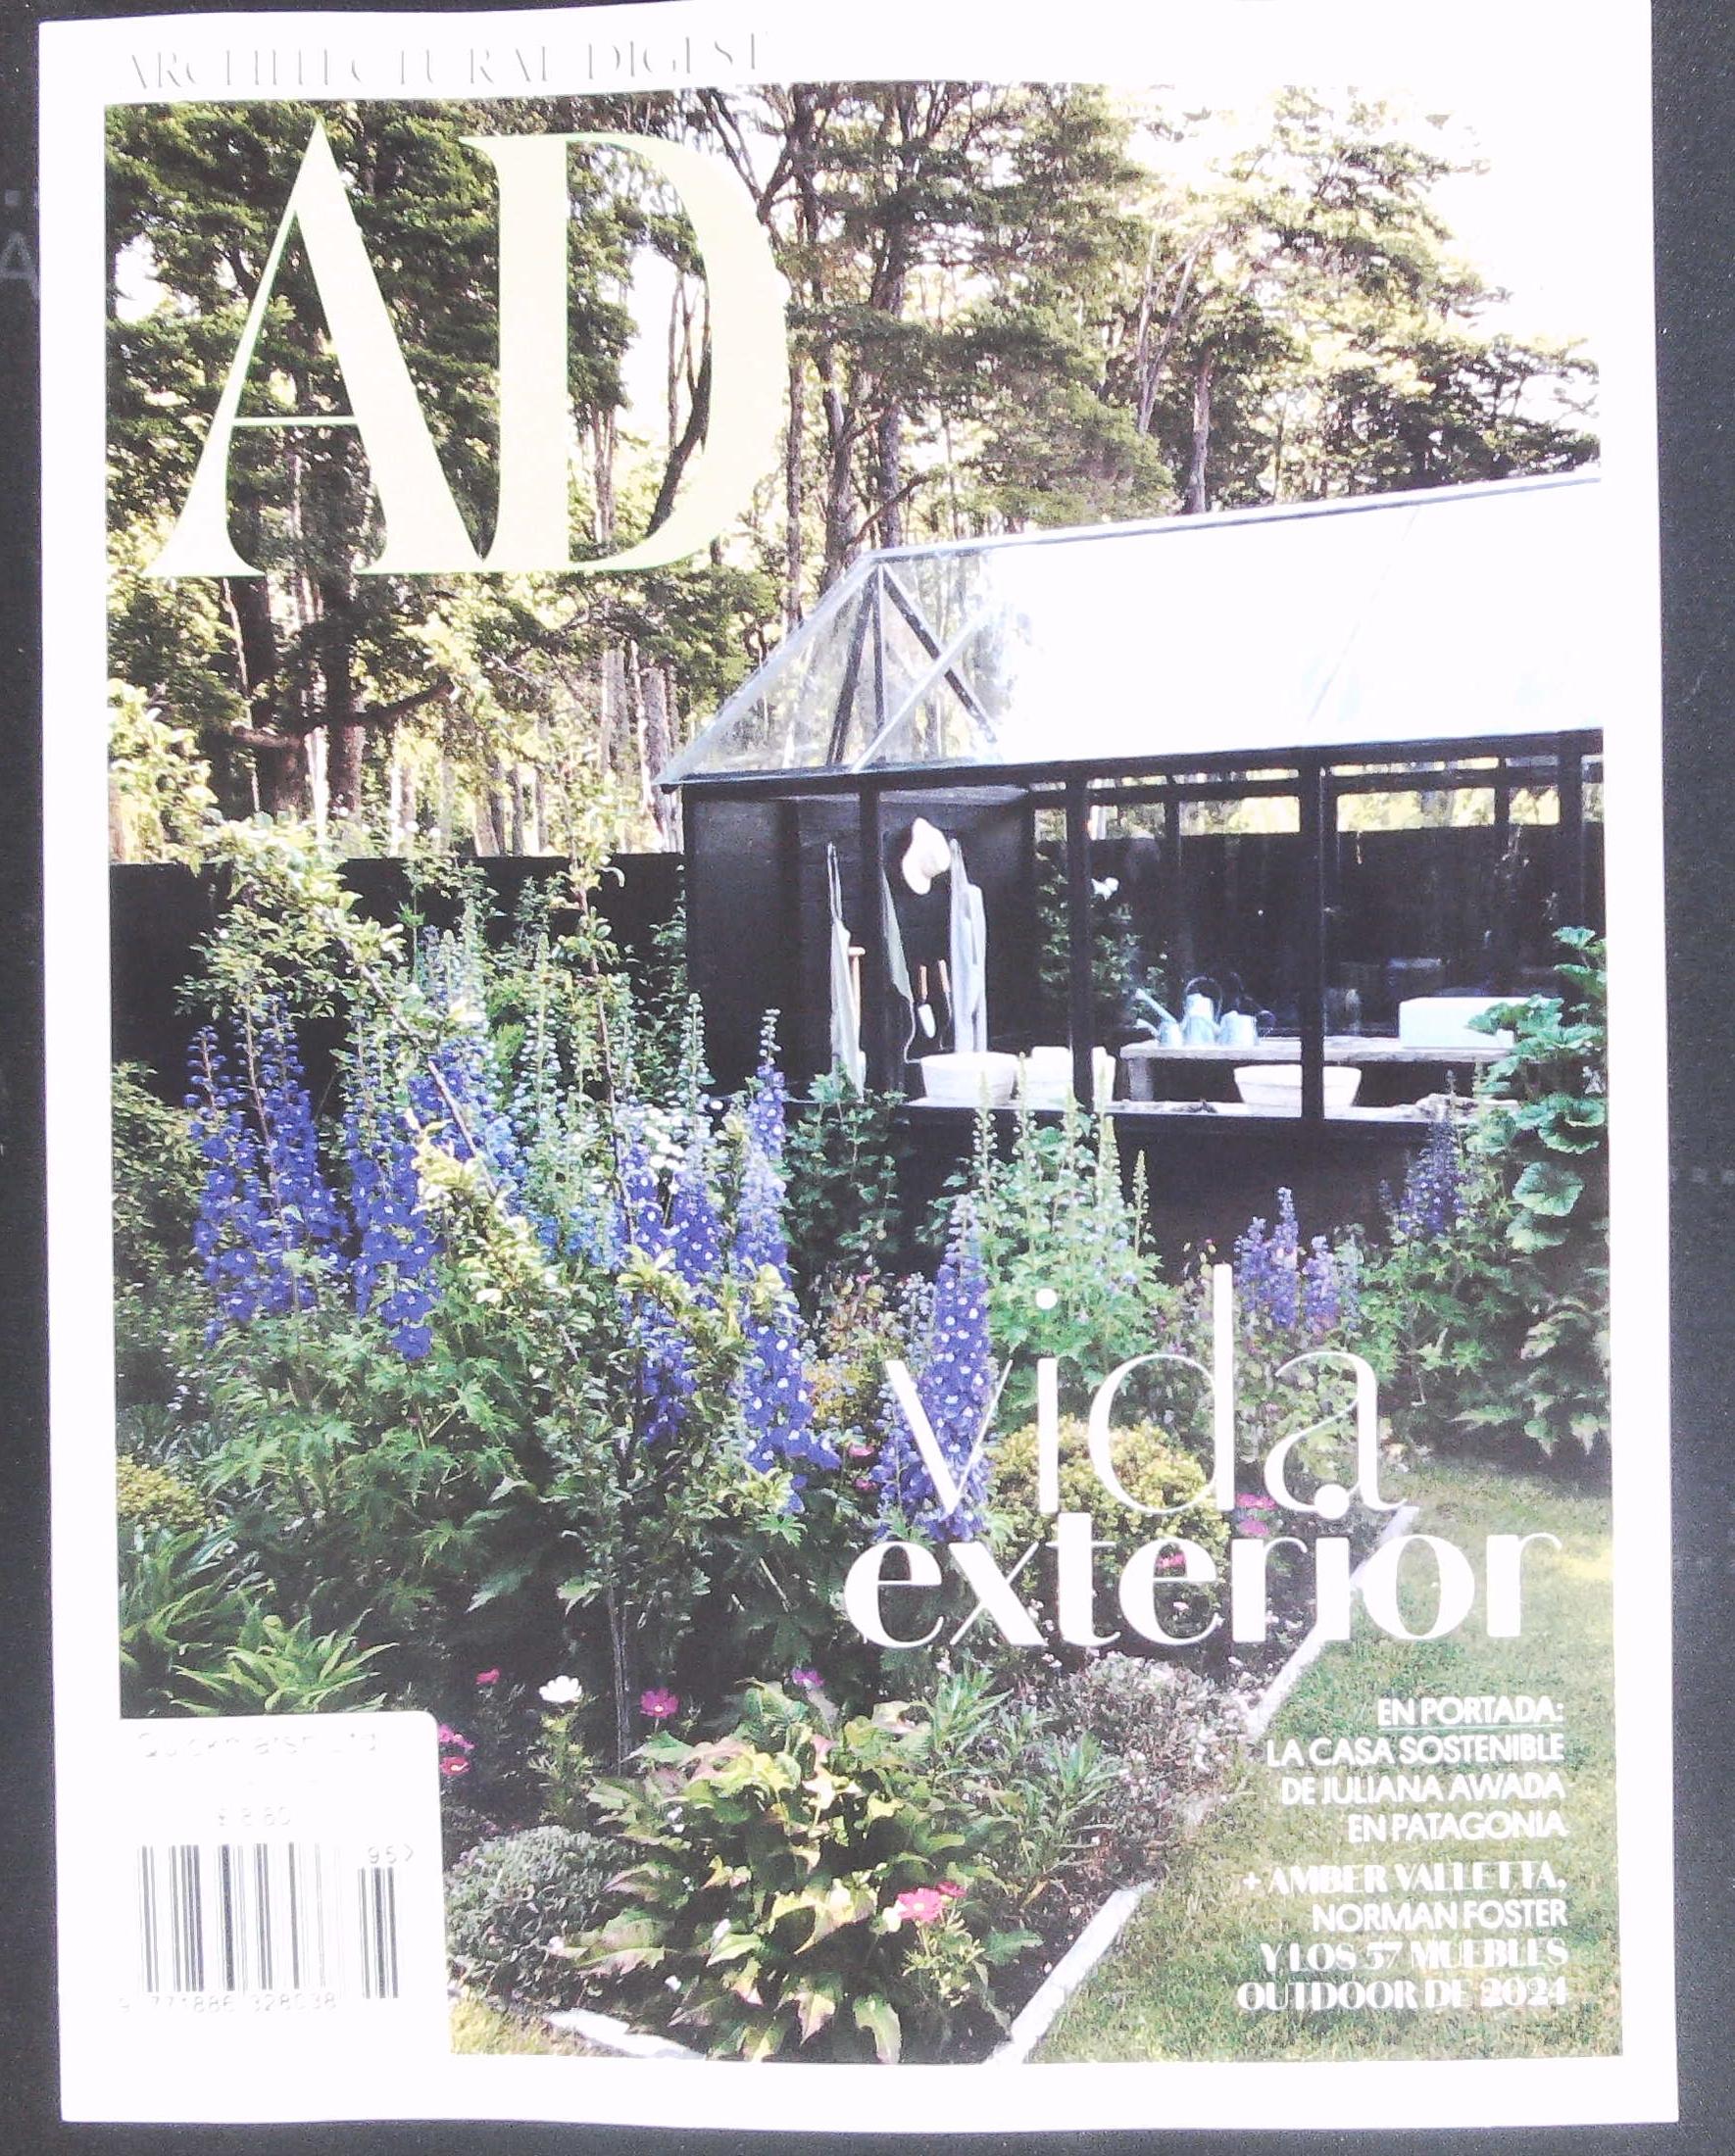 ARCHITECTURAL DIGEST (SPA)